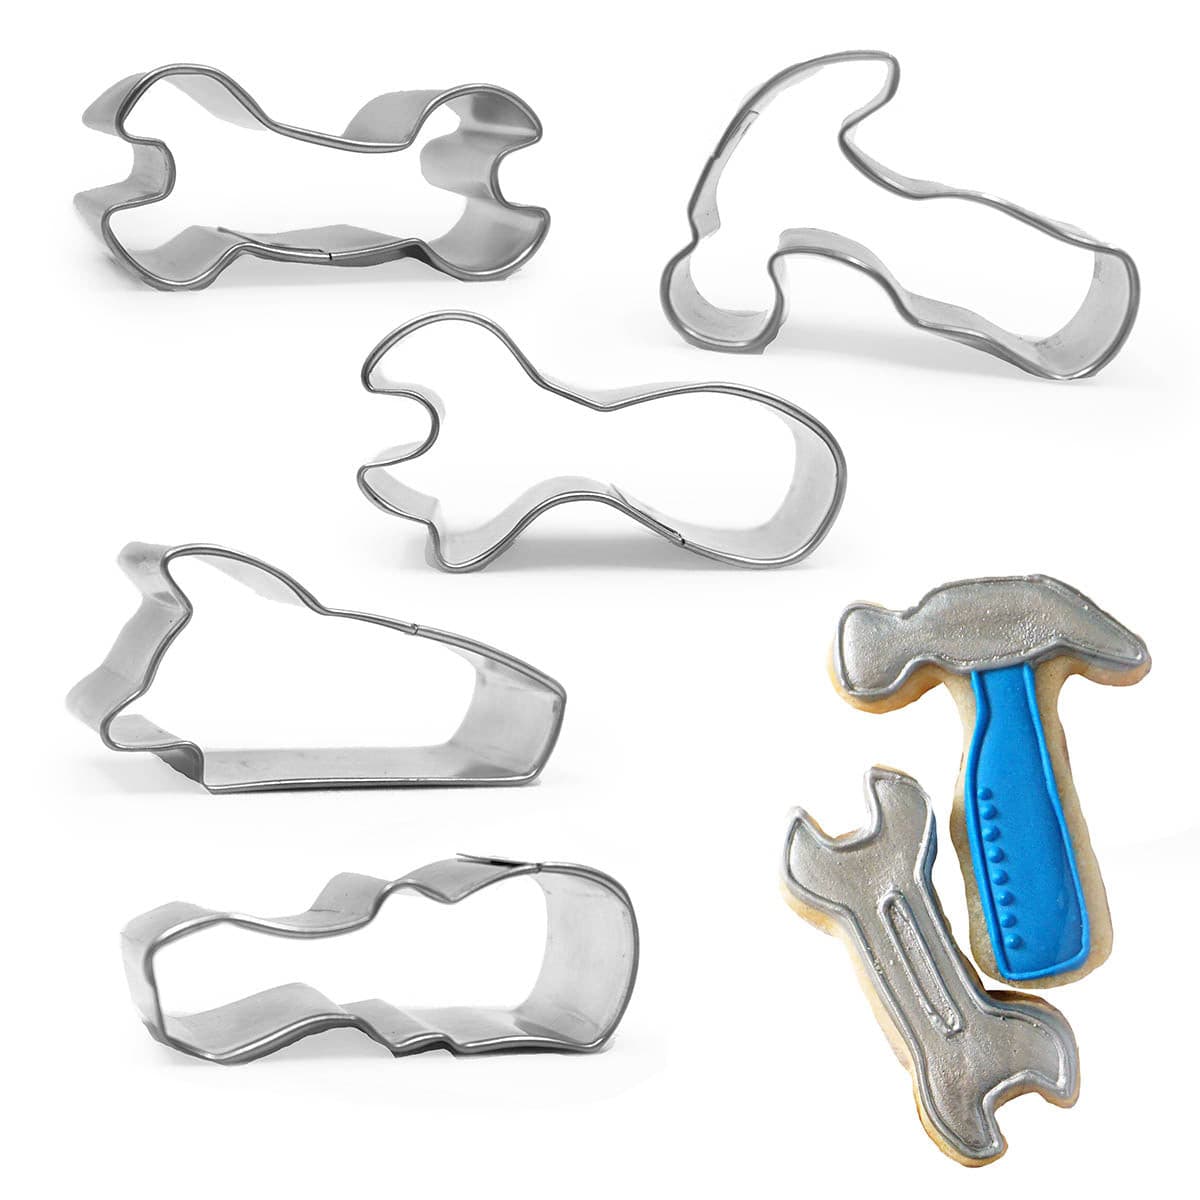 Mini Tool Set of 5 Cookie Cutters 2